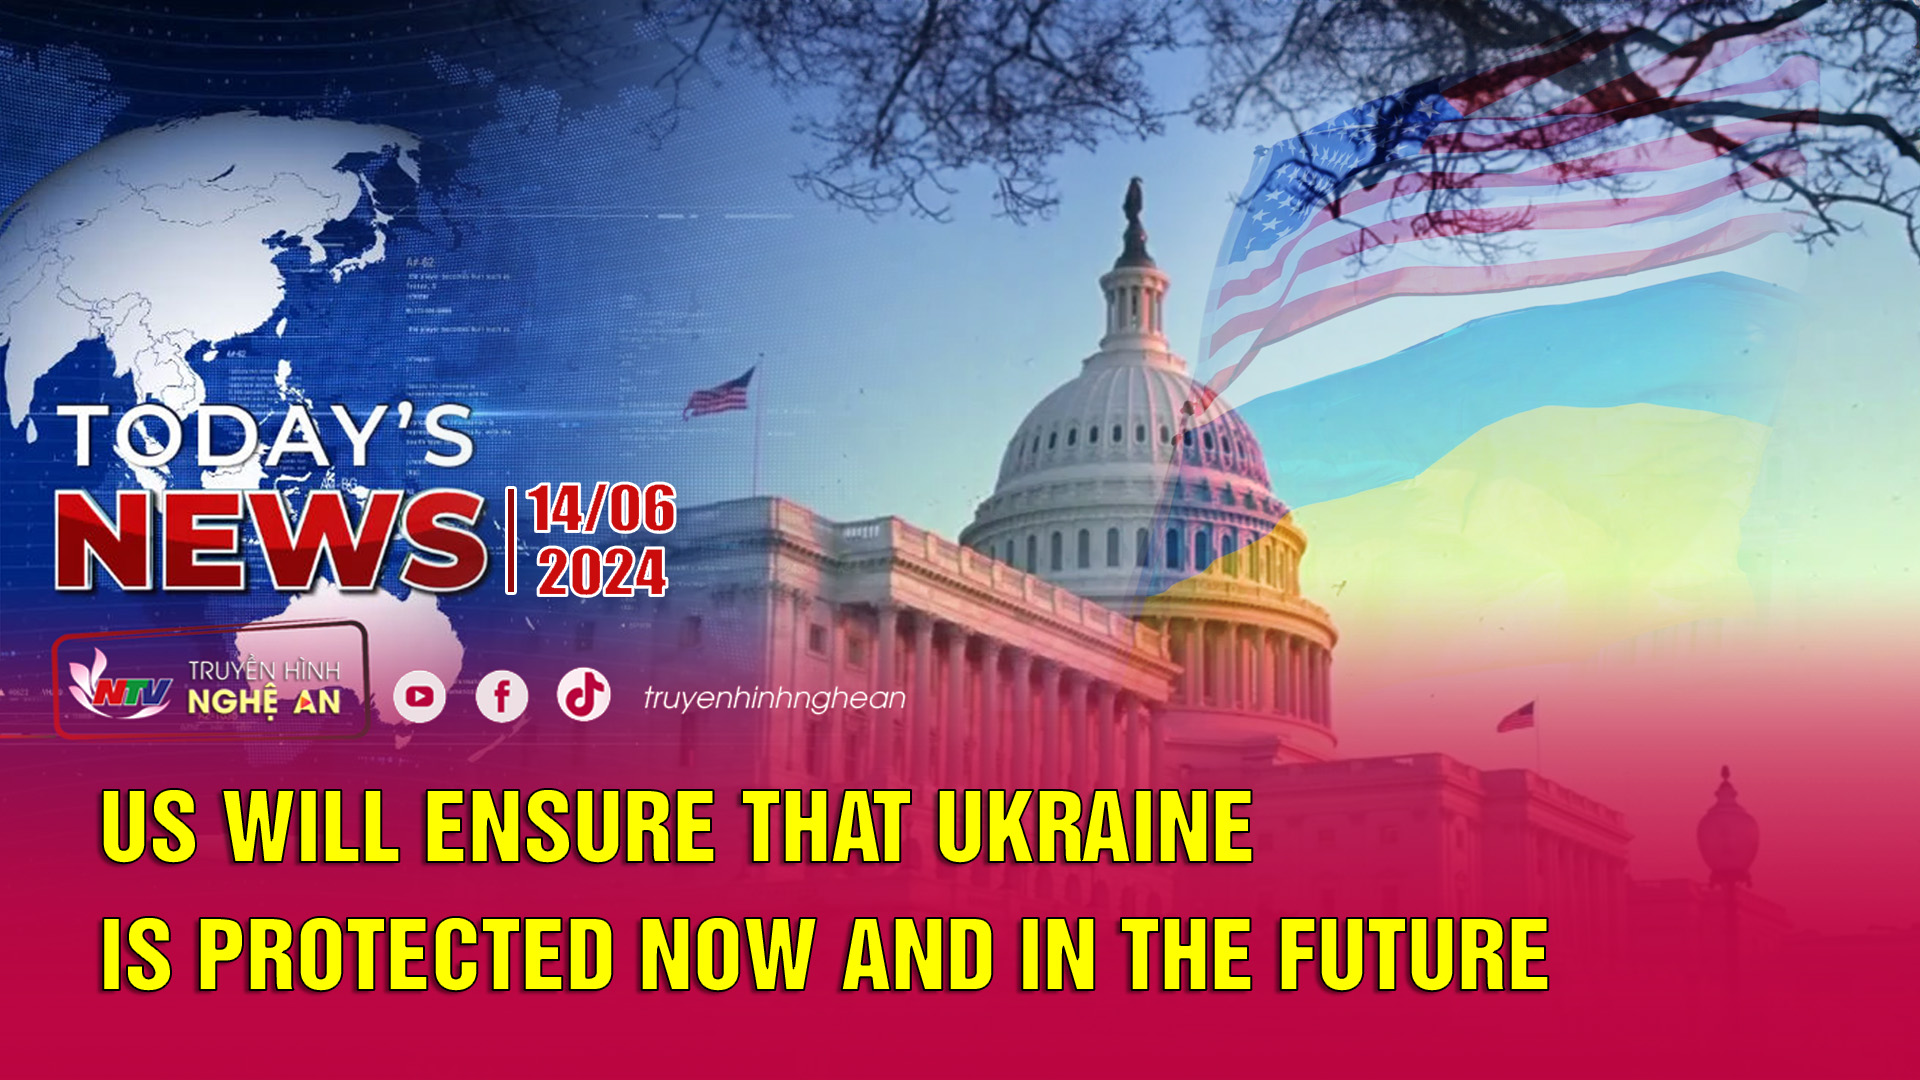 Today's News 14/06/2024: US will ensure that Ukraine is protected now and in the future